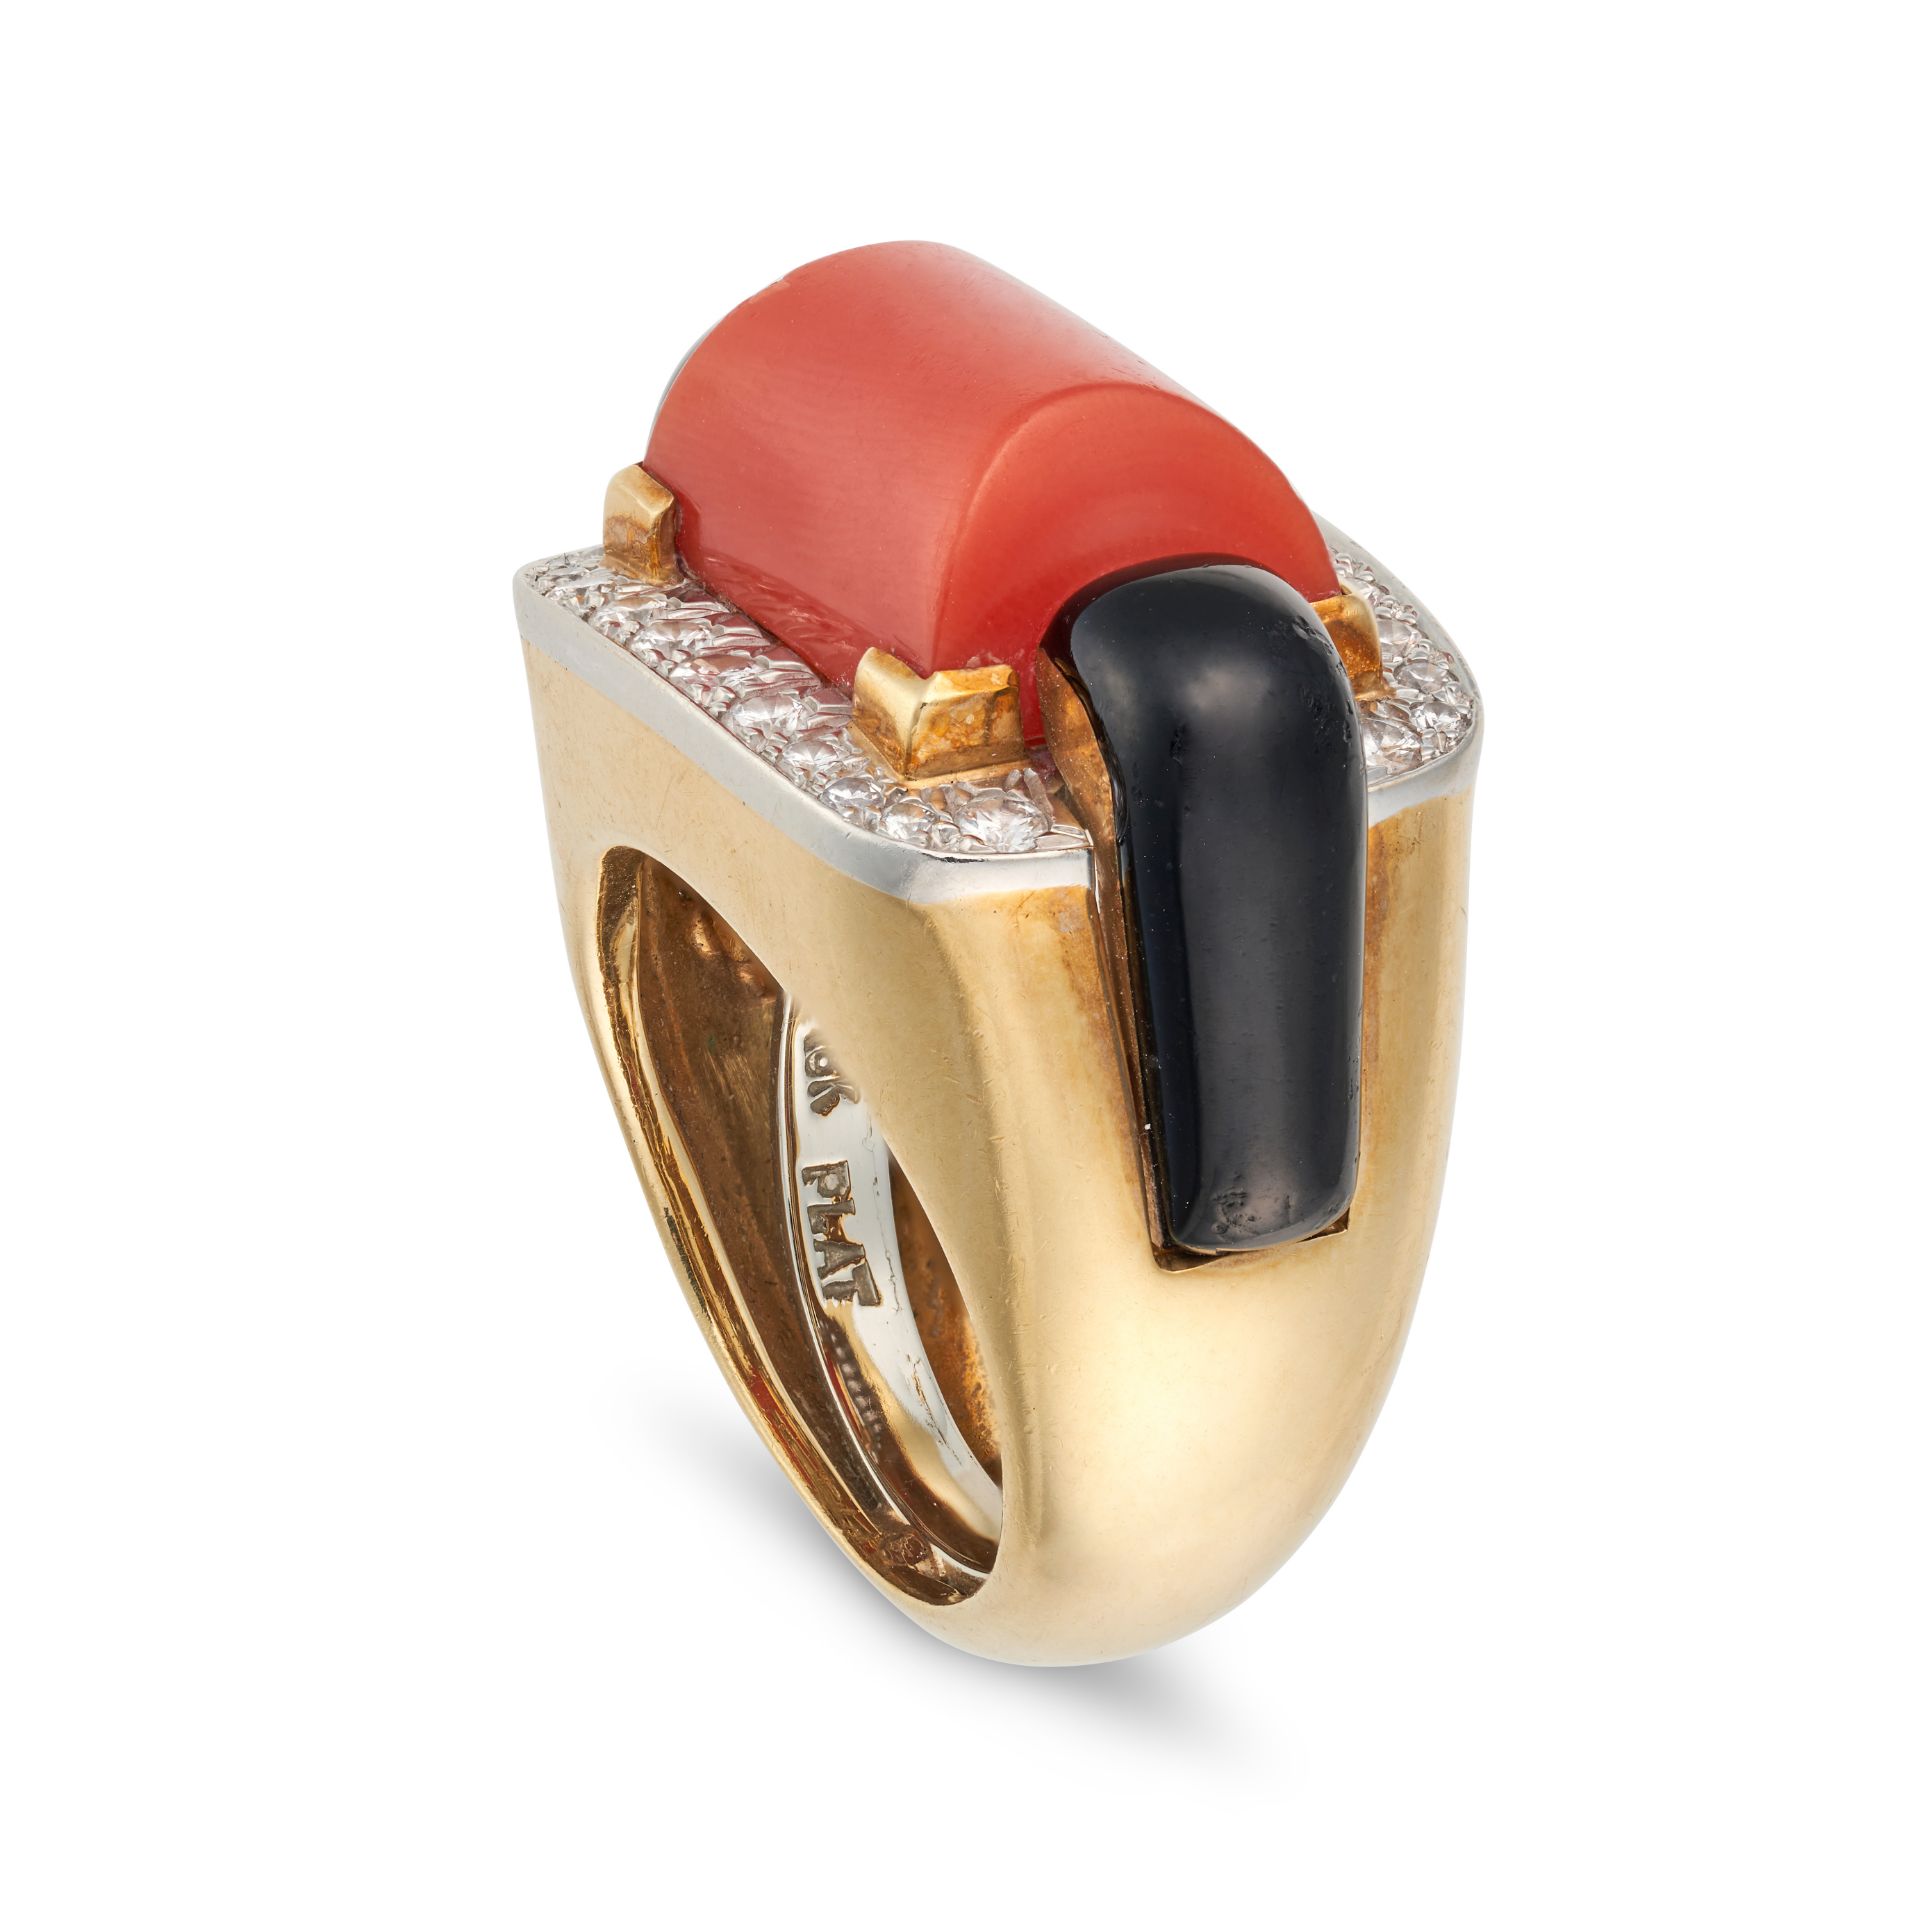 DAVID WEBB, A CORAL, DIAMOND AND ONYX RING set with a polished coral accented by polished onyx an... - Image 3 of 3